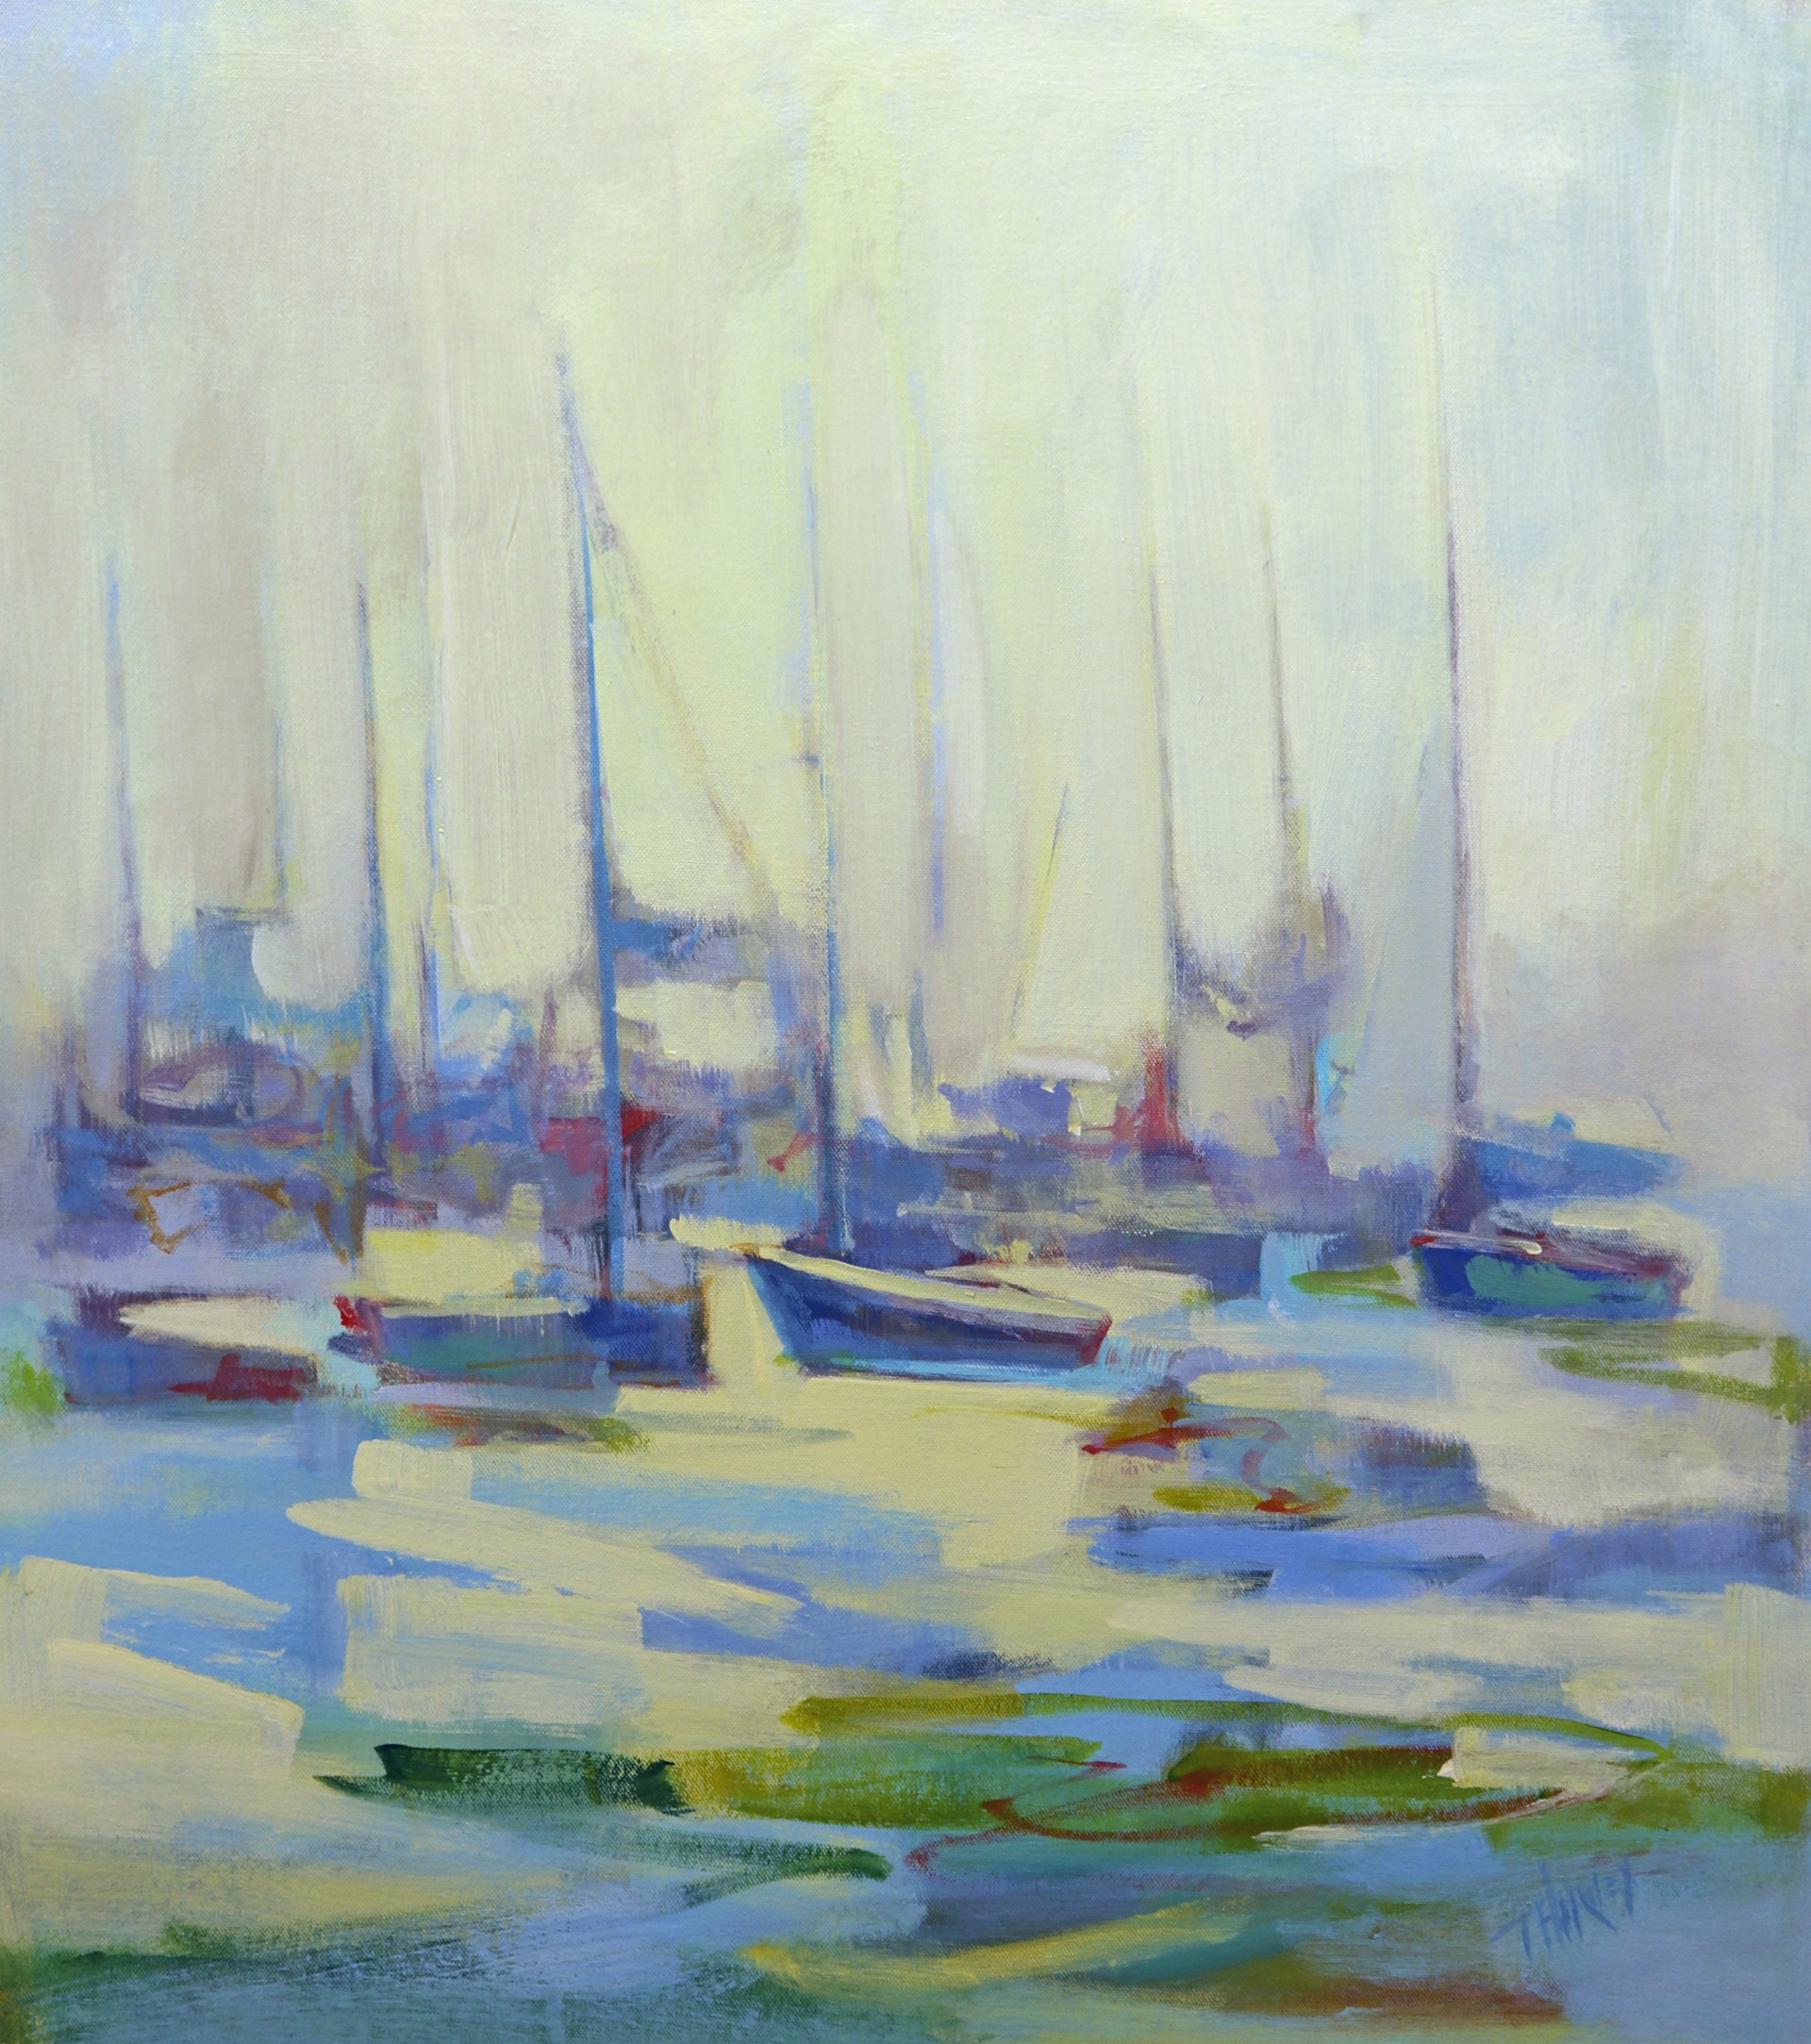 Early Harbor by Trish Hurley